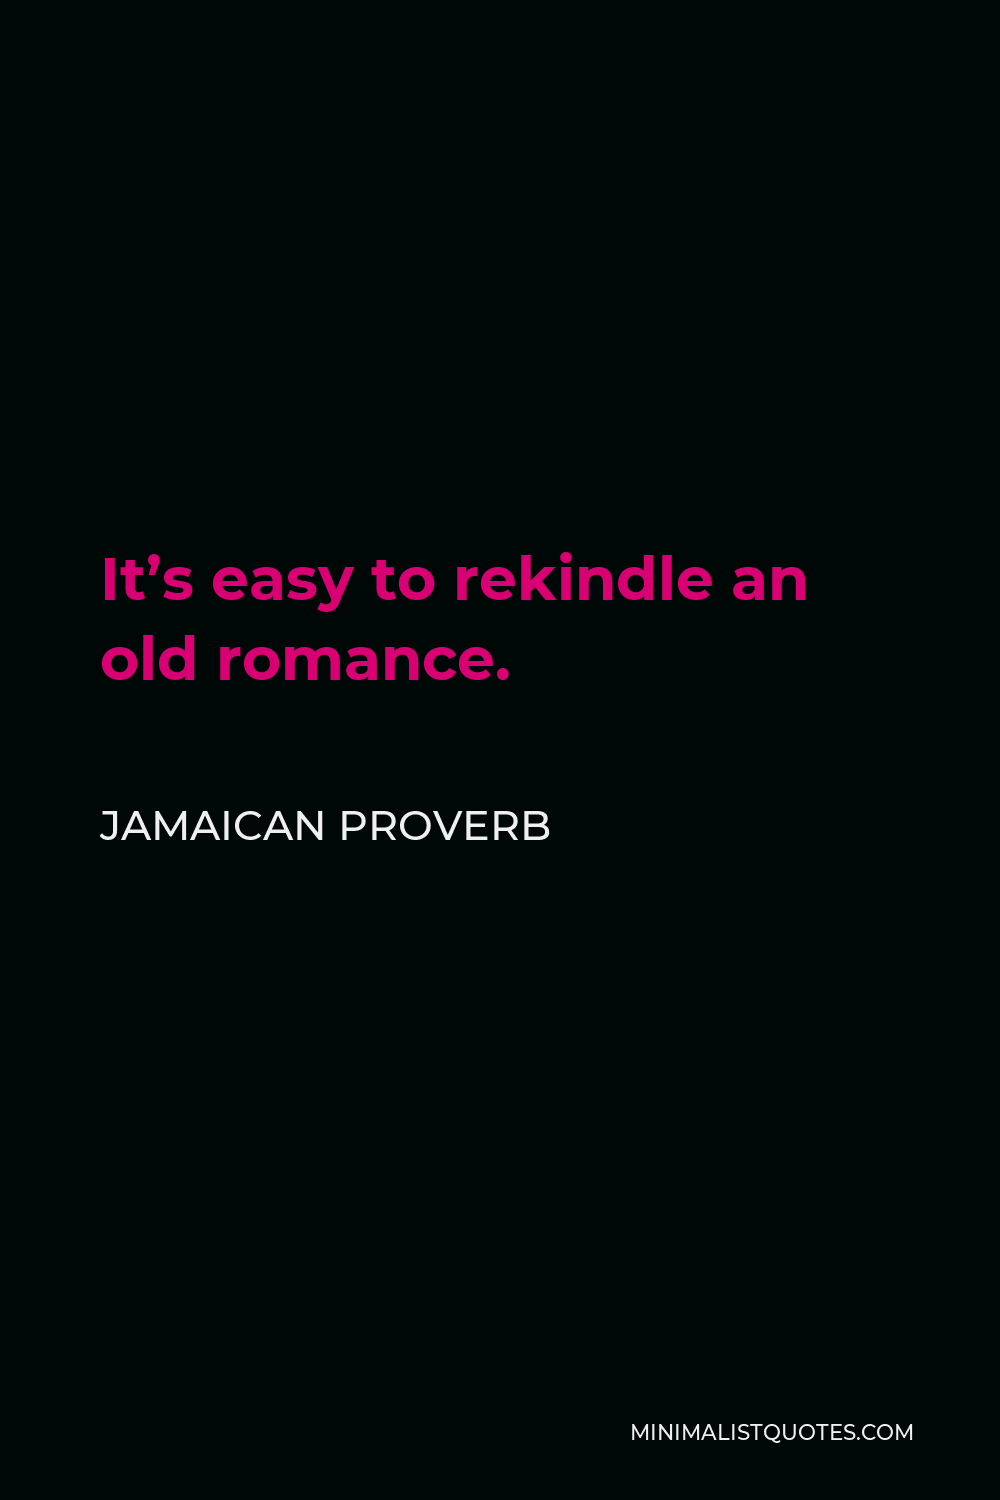 Jamaican Proverb Quote - It’s easy to rekindle an old romance.